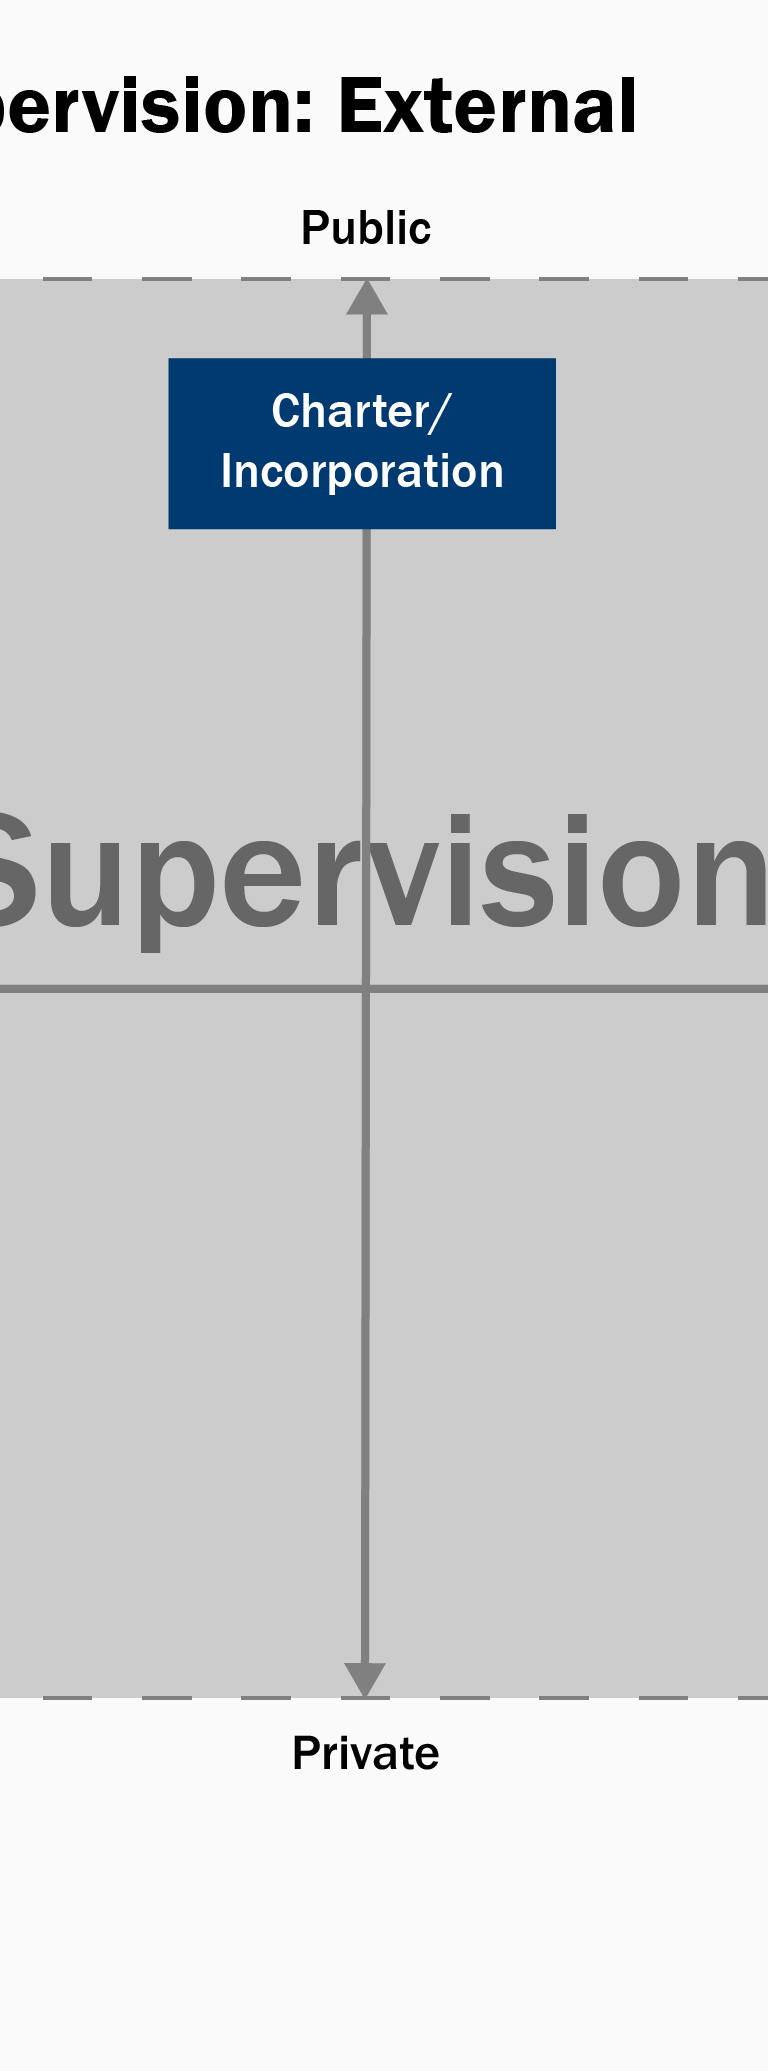 Paradigms of Supervision: External